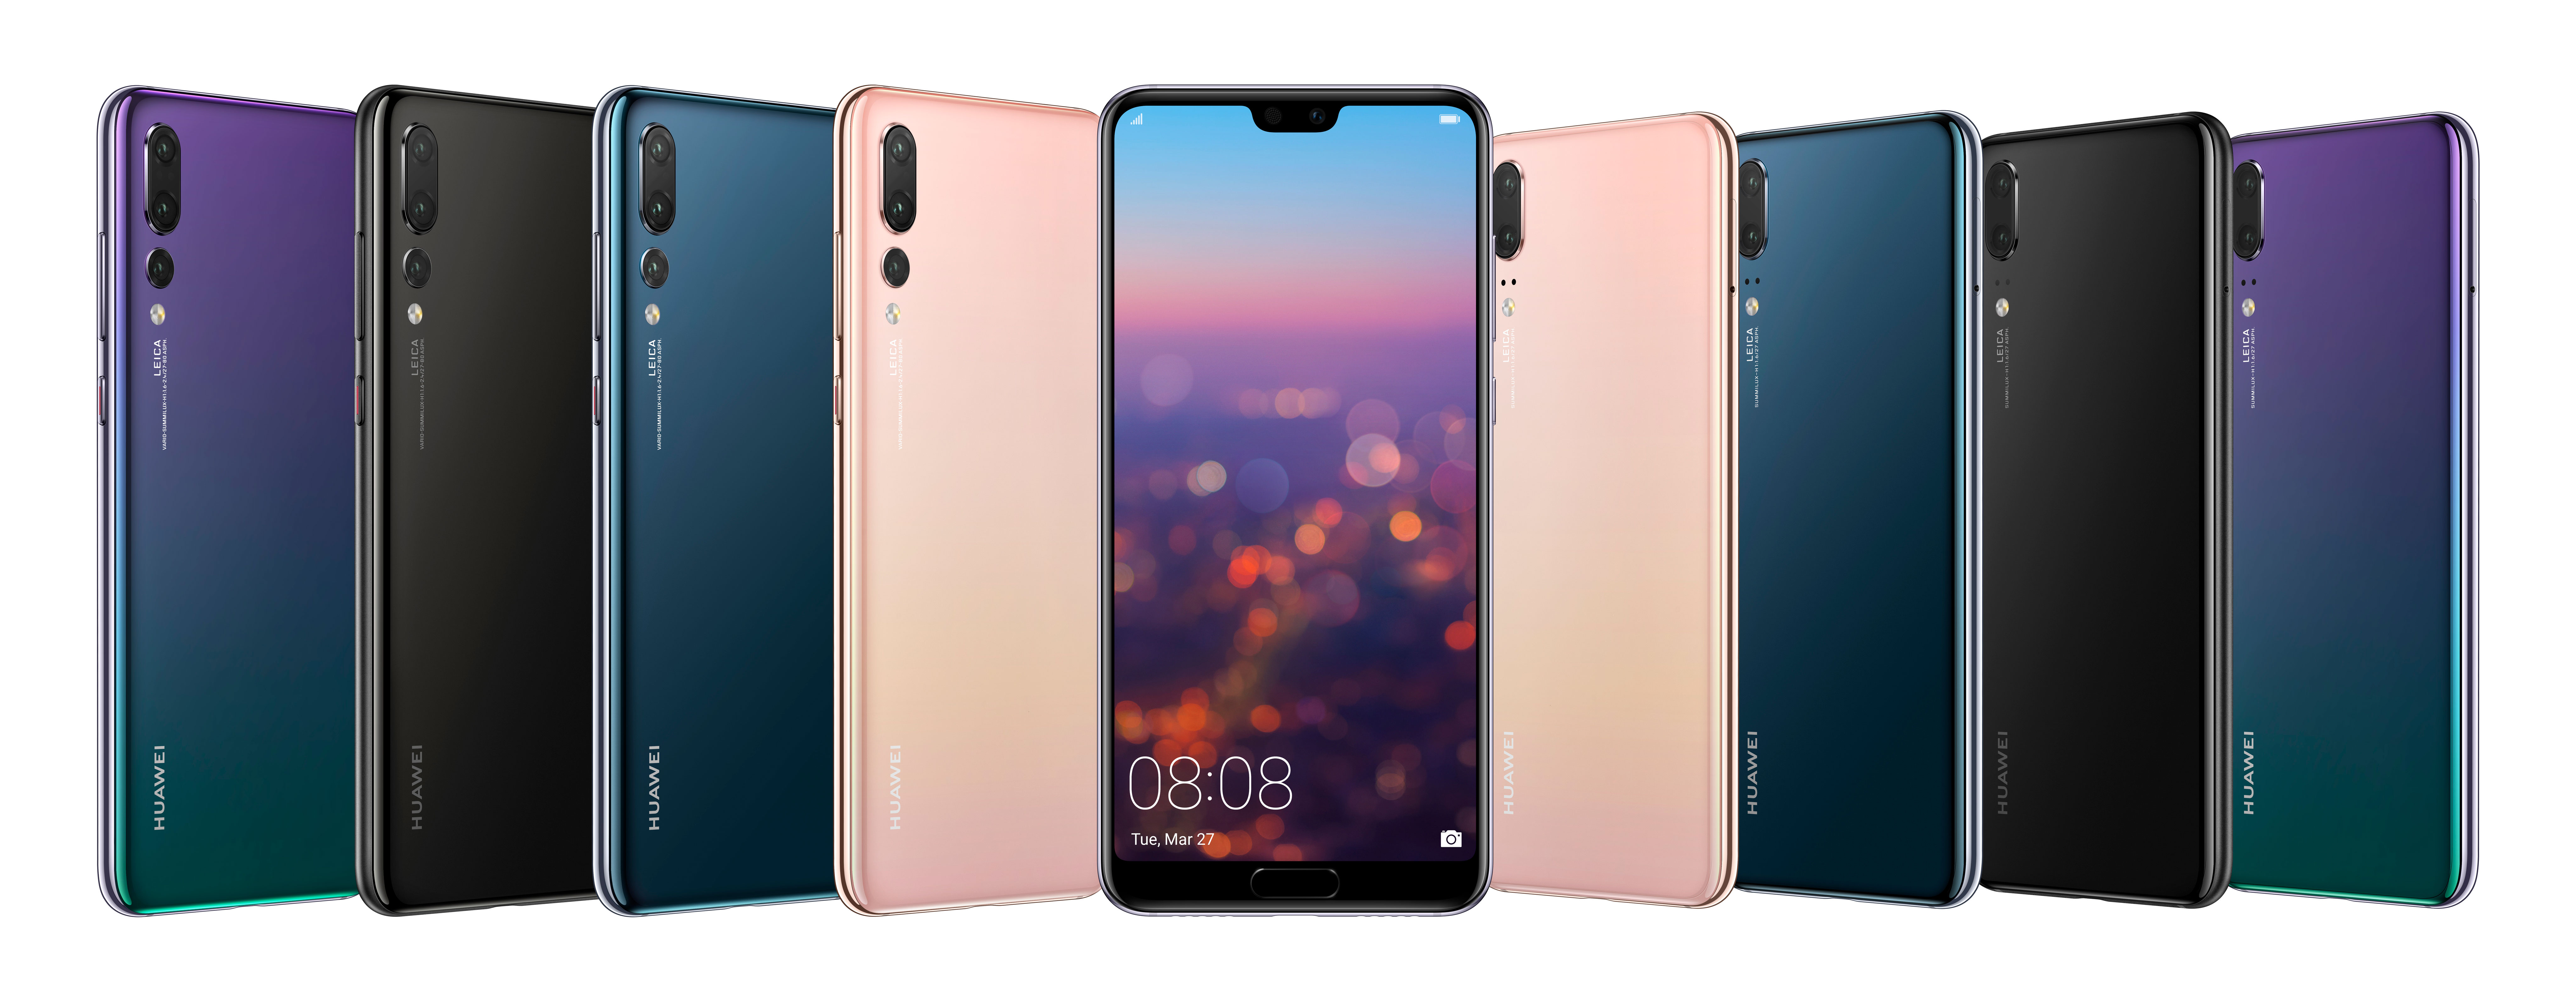 Huawei’s P20 Series To Leave Apple & Samsung For Dead